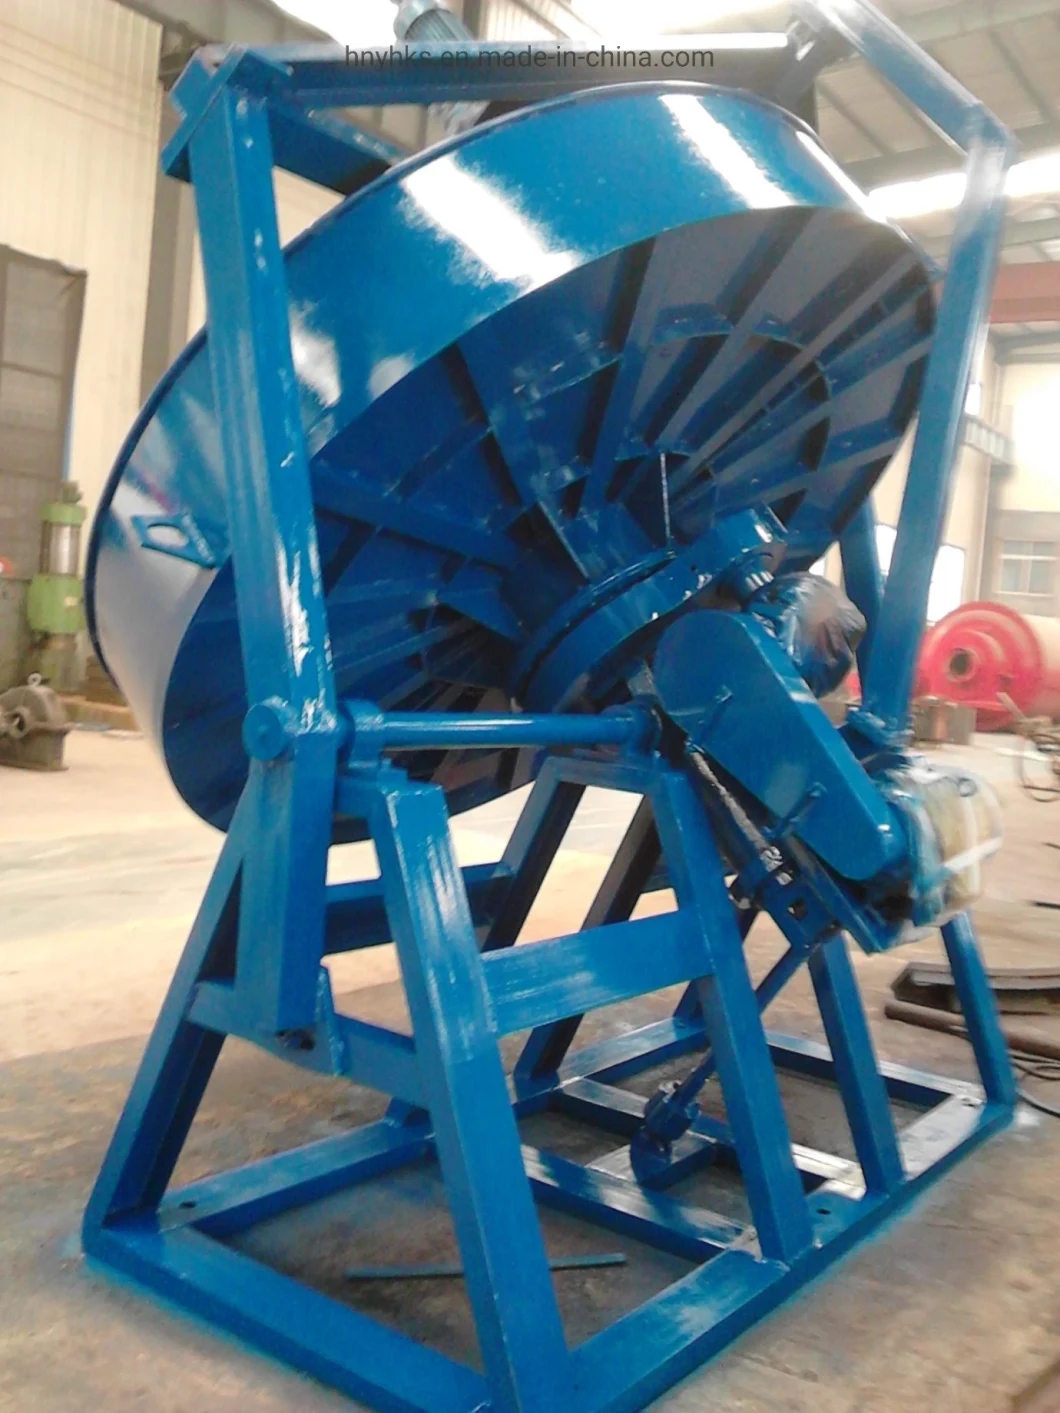 Pelleting Machine / Pellet Machine Used in Pig Iron and Sponge Iron Production Line